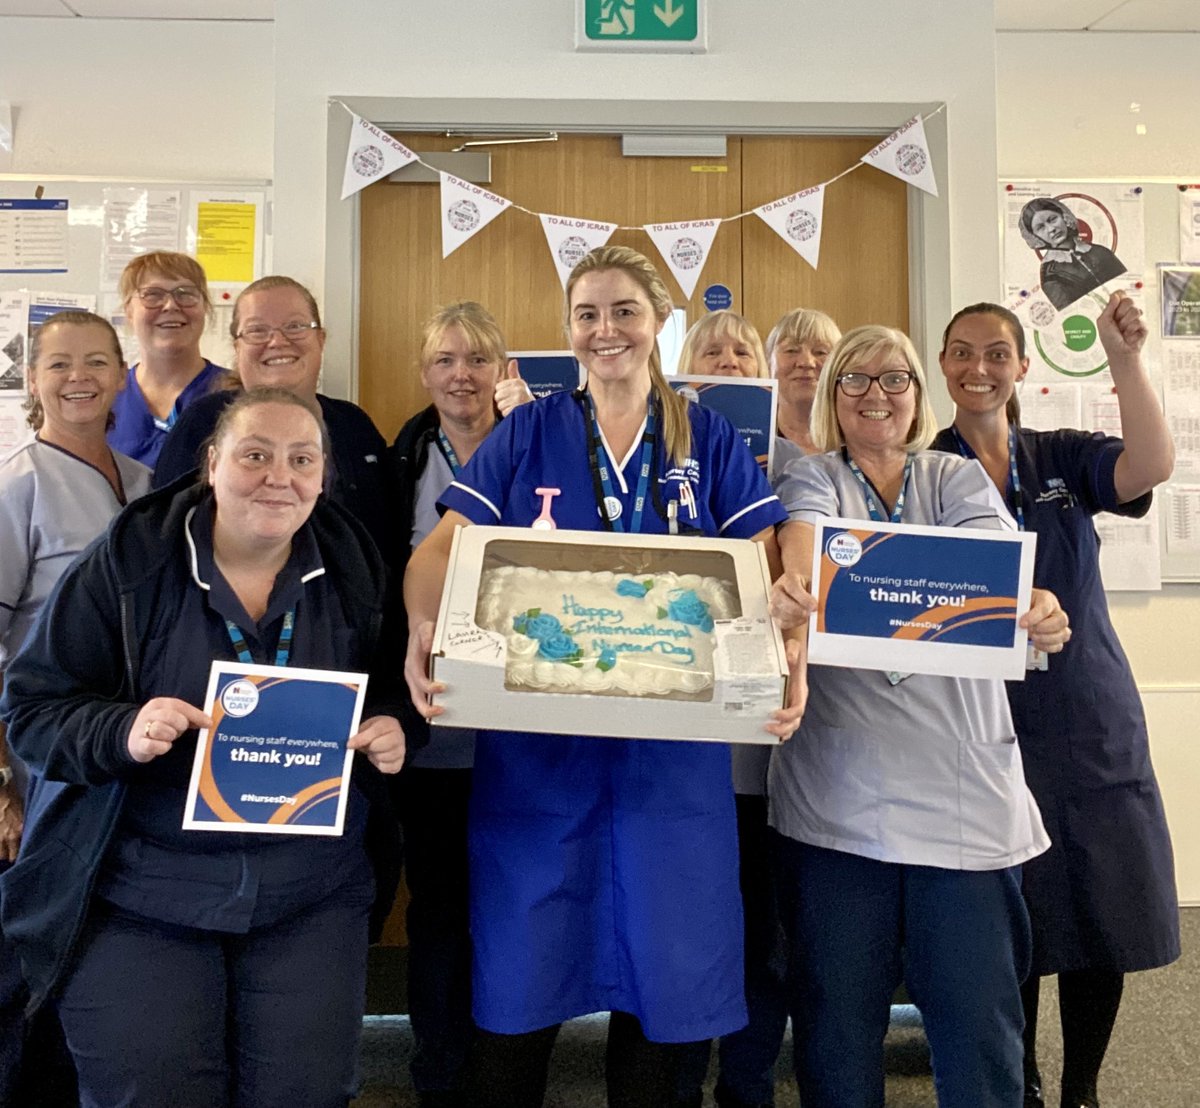 Local rep Hope McNulty and her colleagues have been celebrating #NursesDay @Mersey_Care - enjoy that cake!